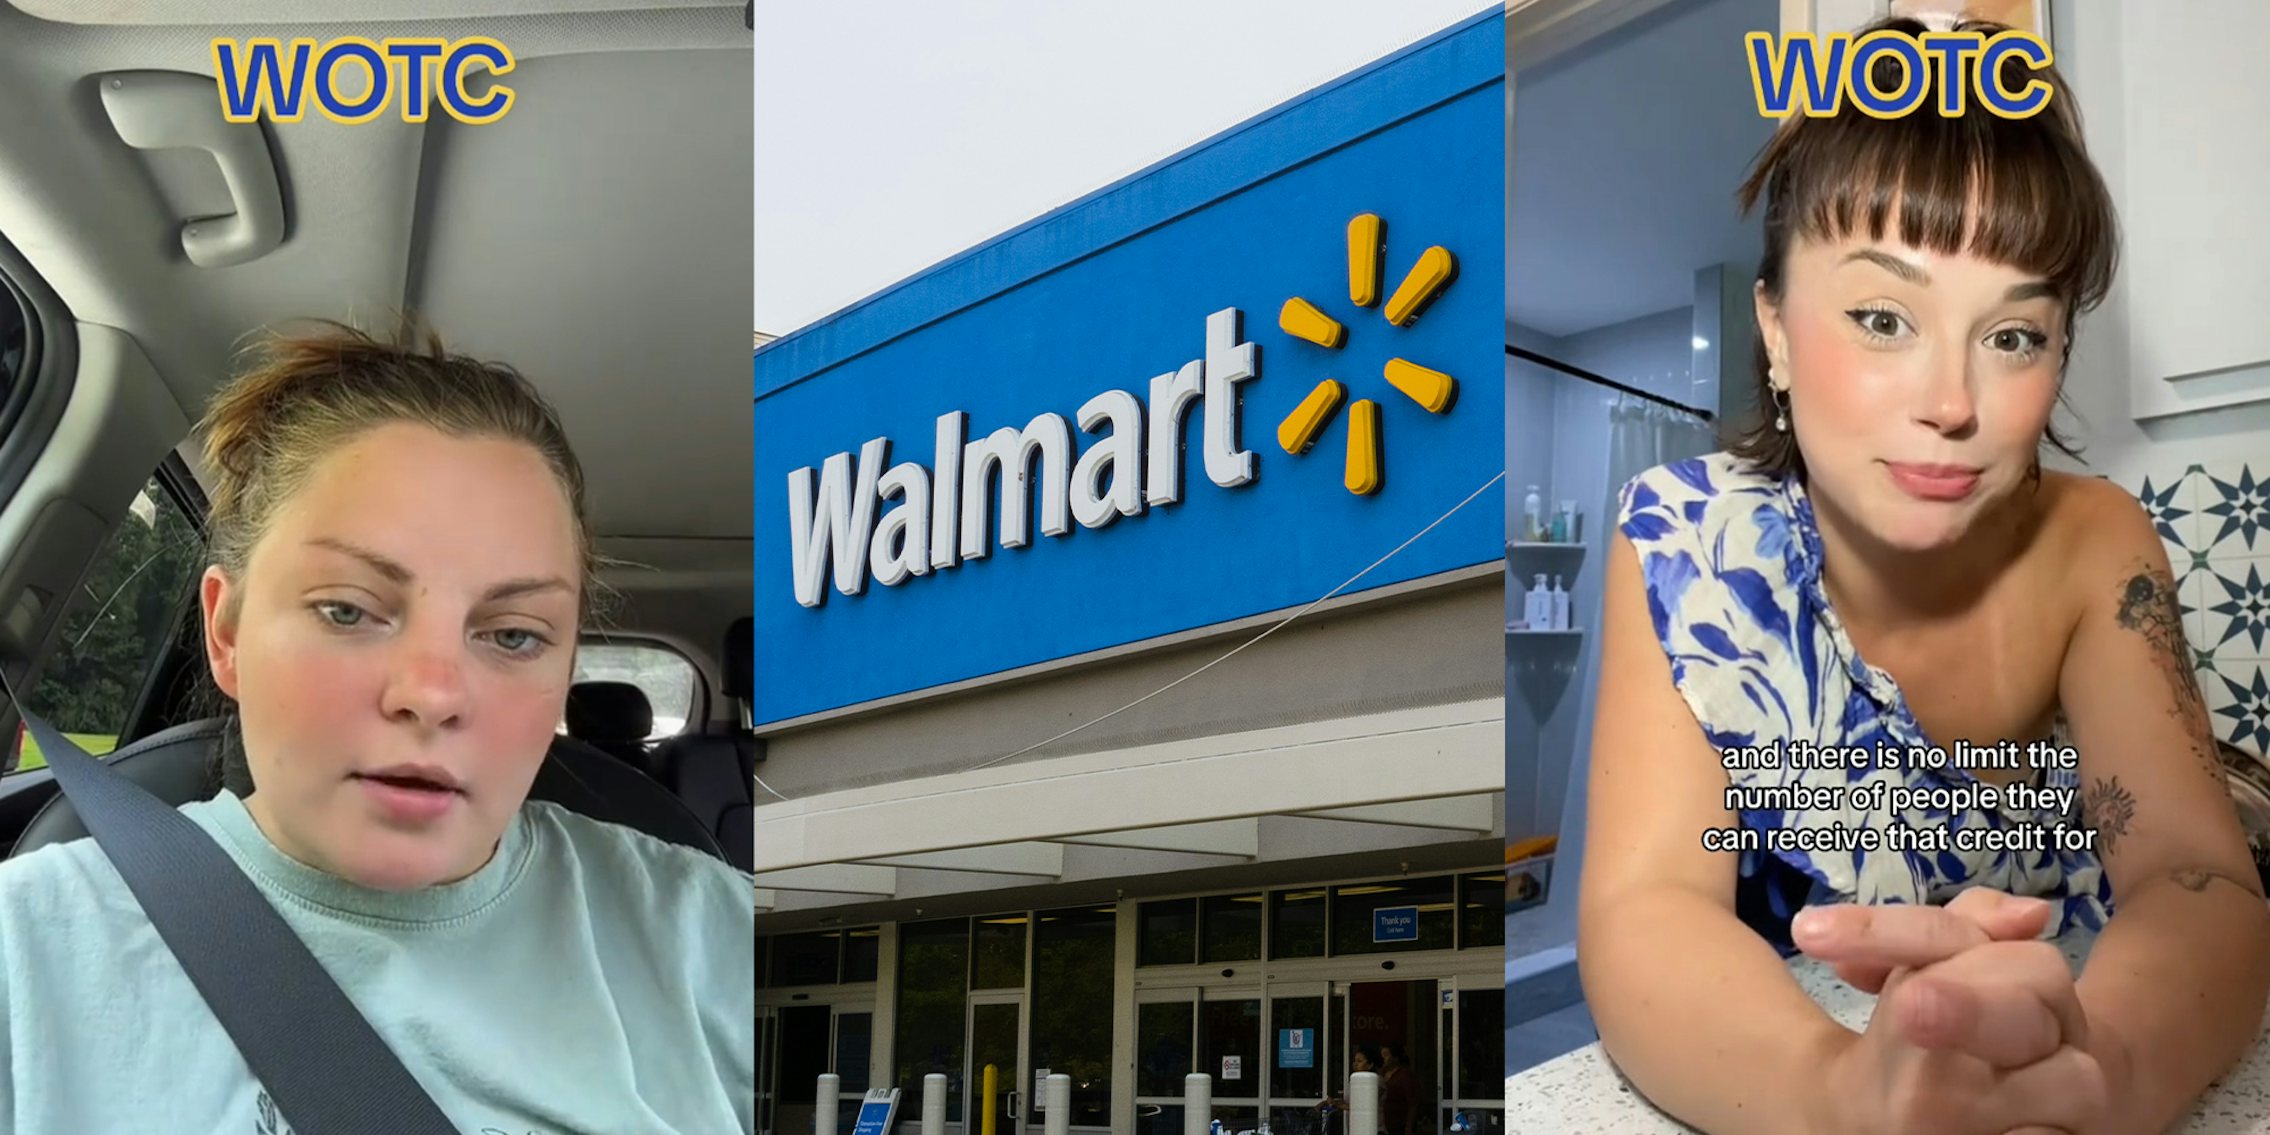 Woman inside of car talking about wotc; Walmart store front